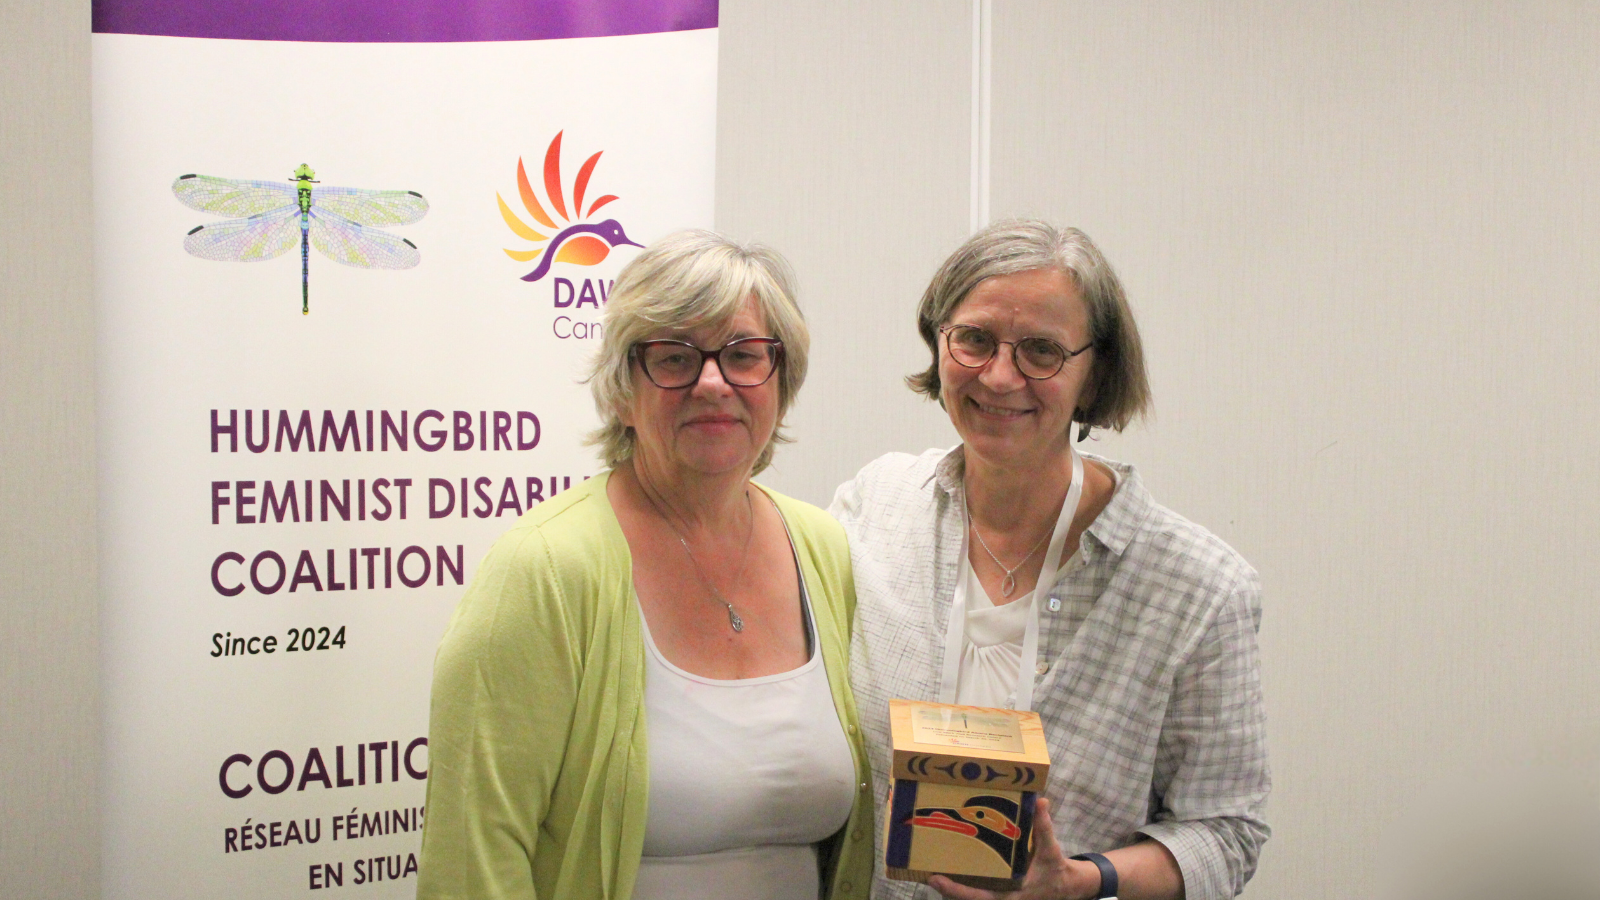 Photo of Bonnie Brayton and Deborah Stienstra posing together and holding the Hummingbird Award for the Live Work Well Research Centre